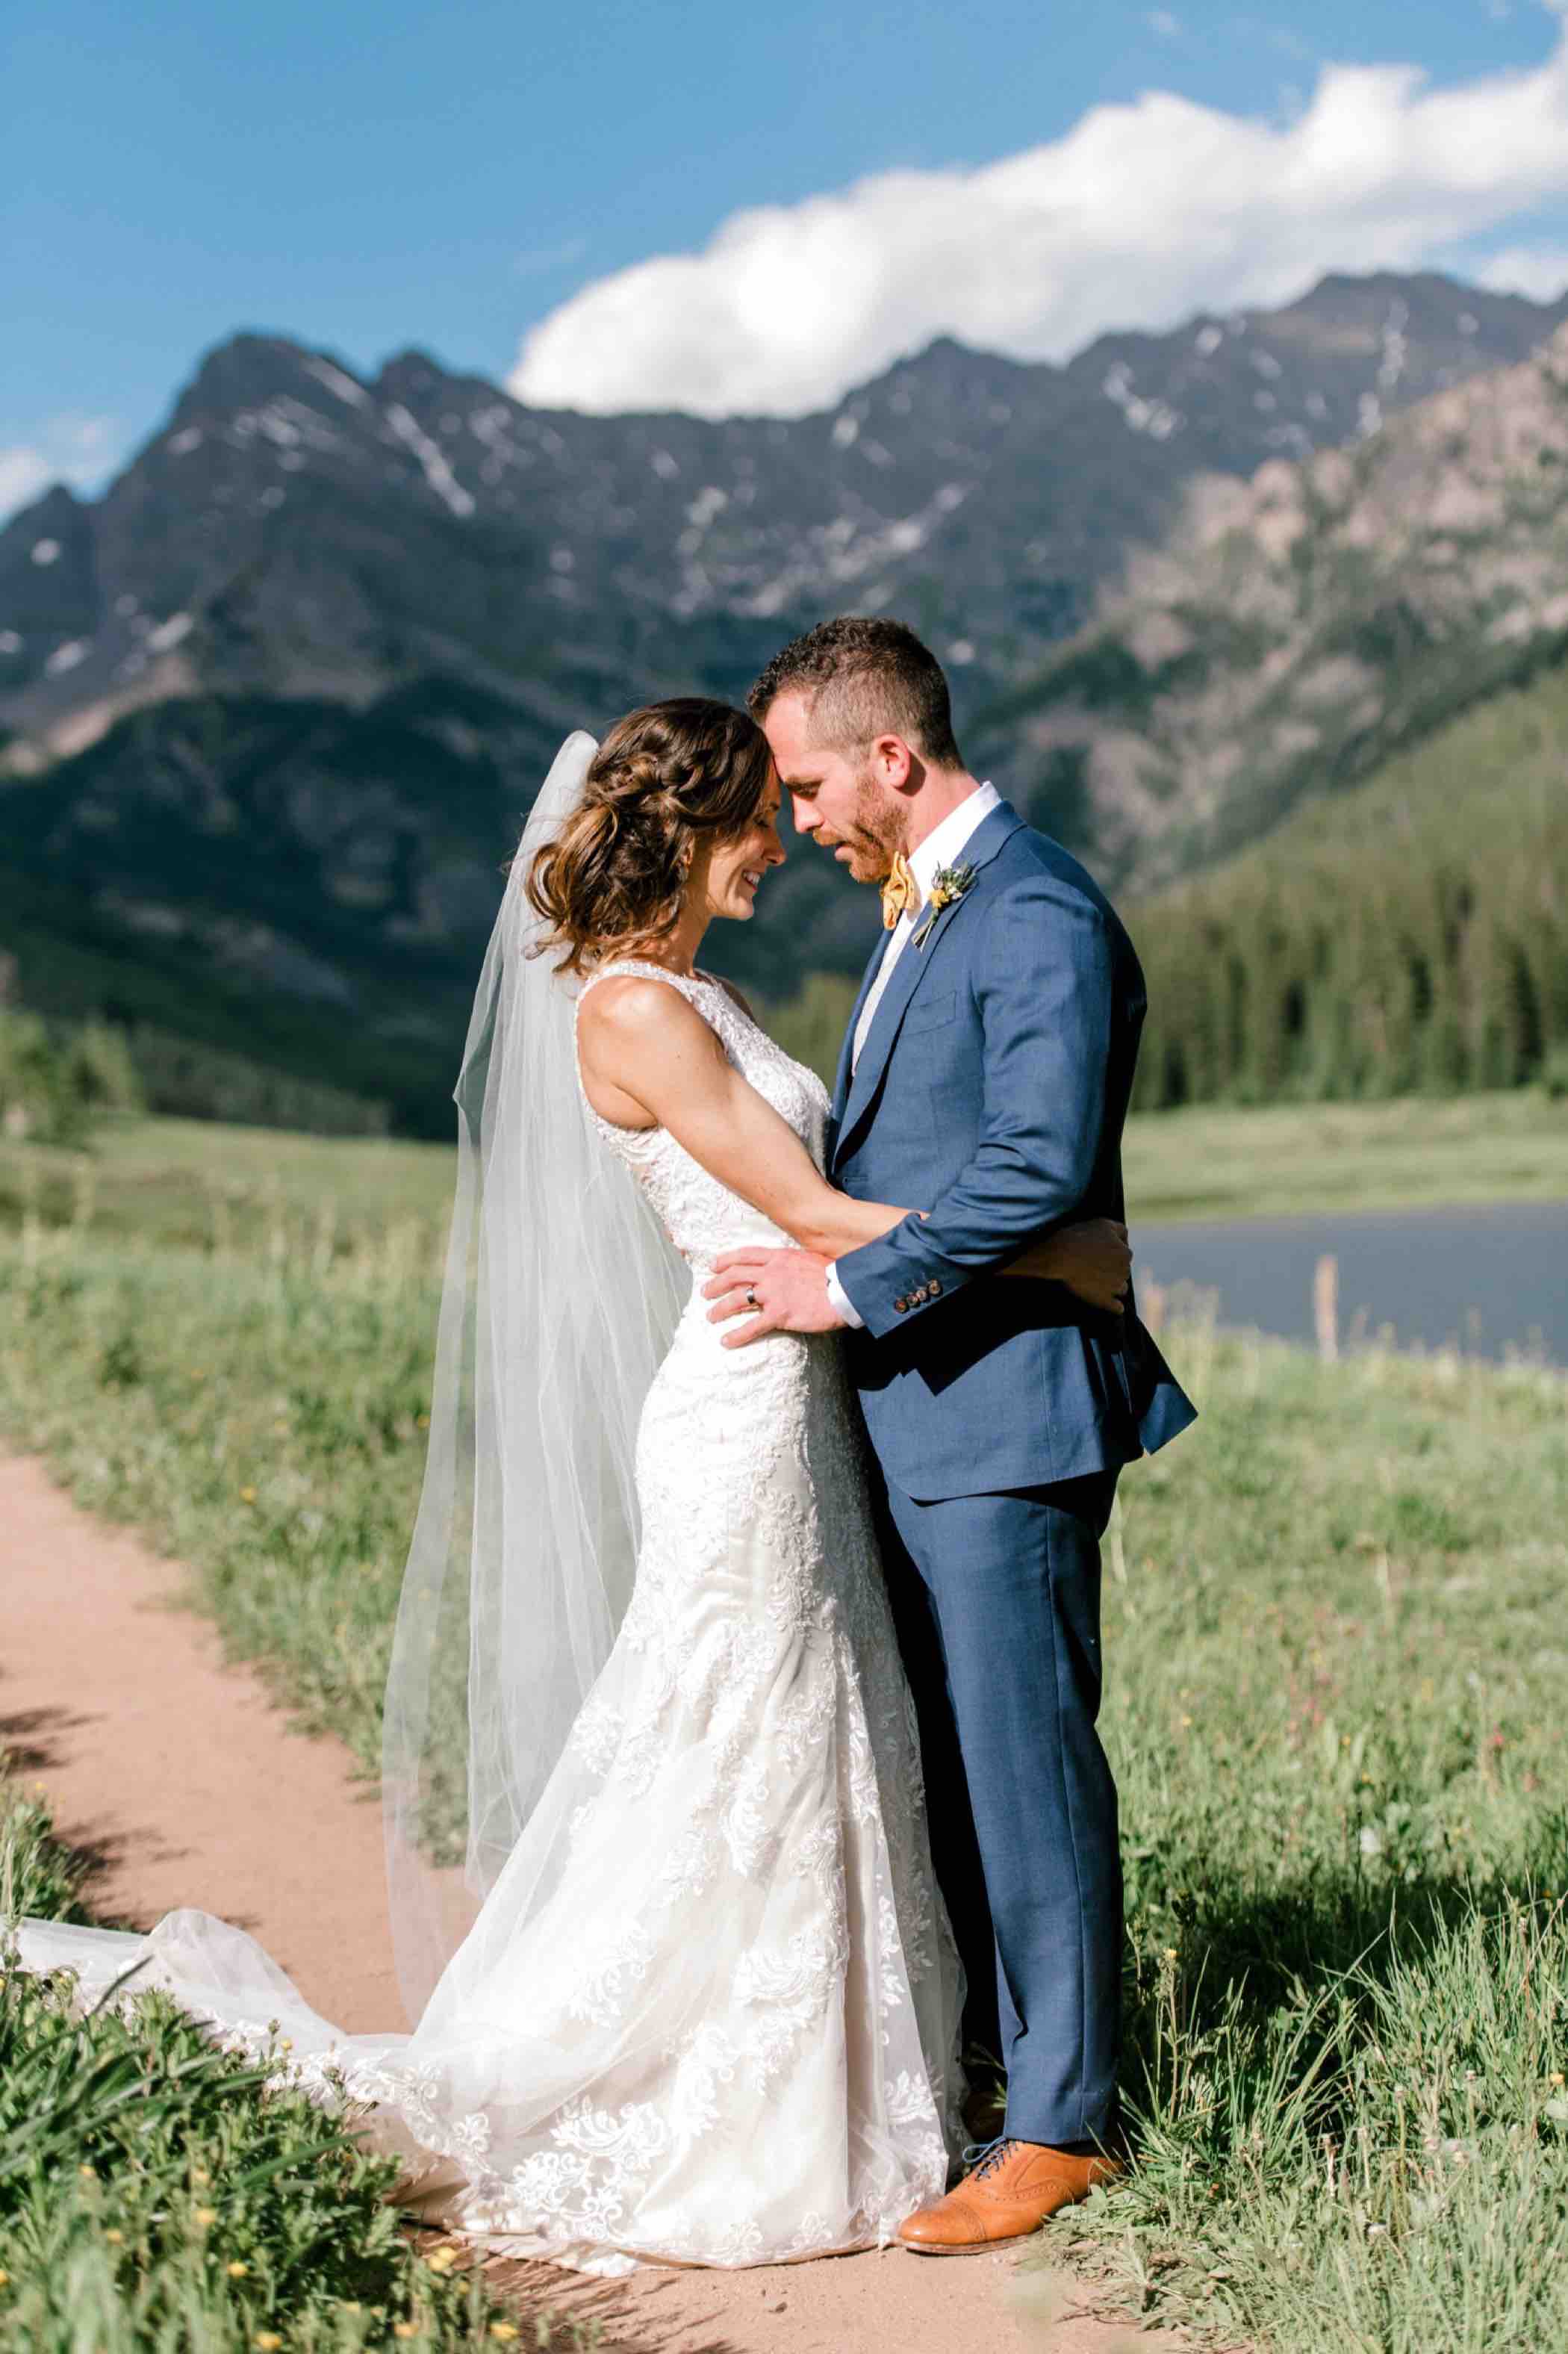 Bride and groom portraits at Piney River Ranch with the mountains of the Gore Range in Vail Colorado. Photo by Ali and Garrett, Romantic, Adventurous, Nostalgic Wedding Photographers.